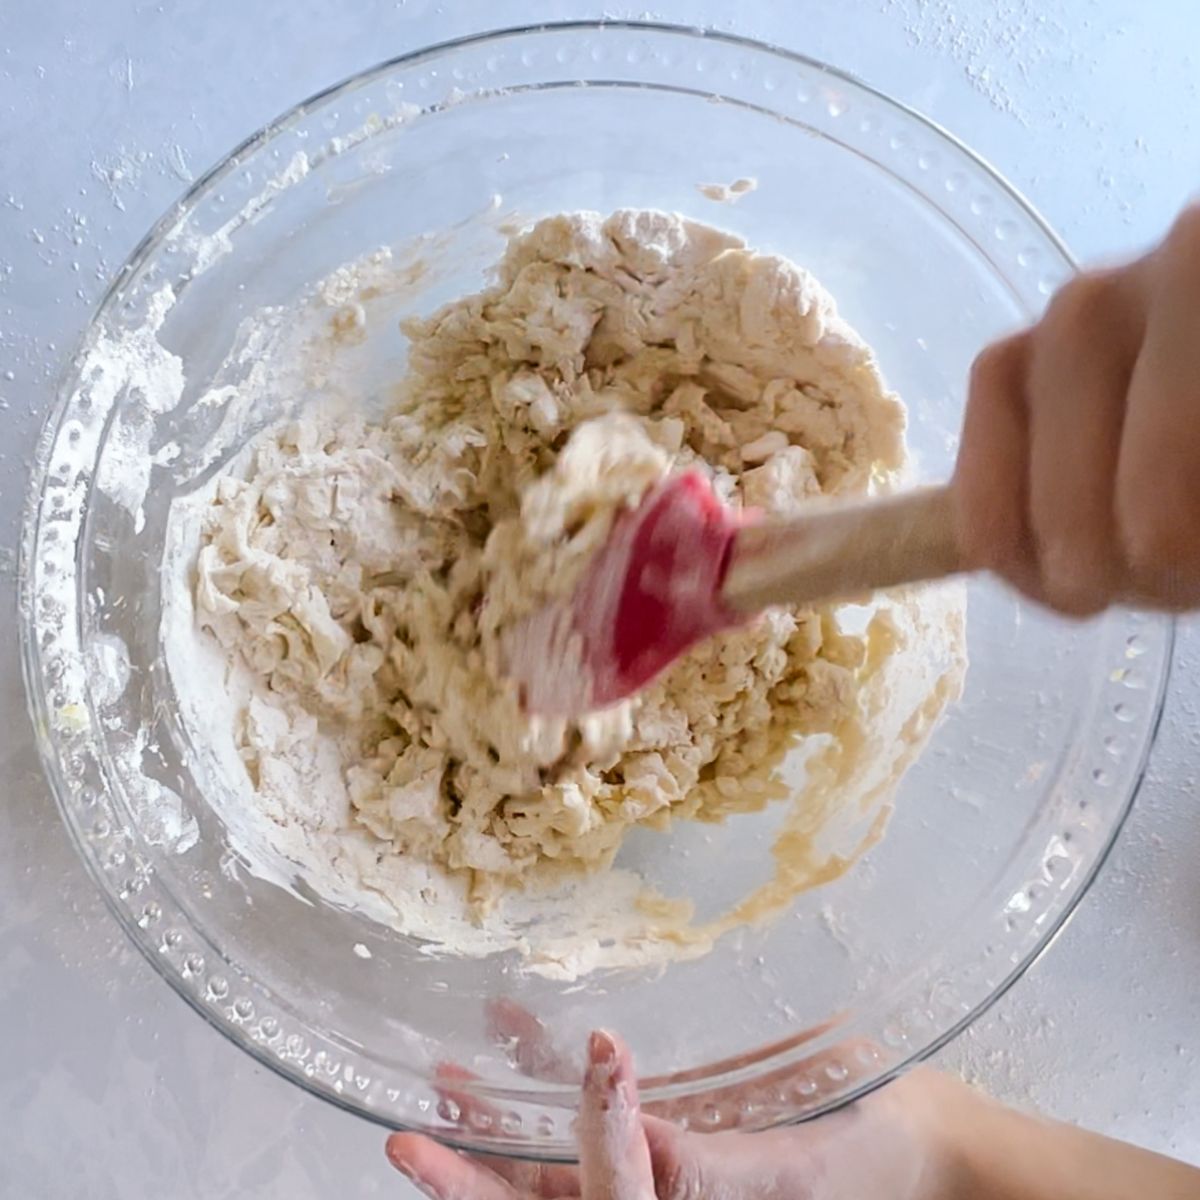 mixing the dough with a spatula.